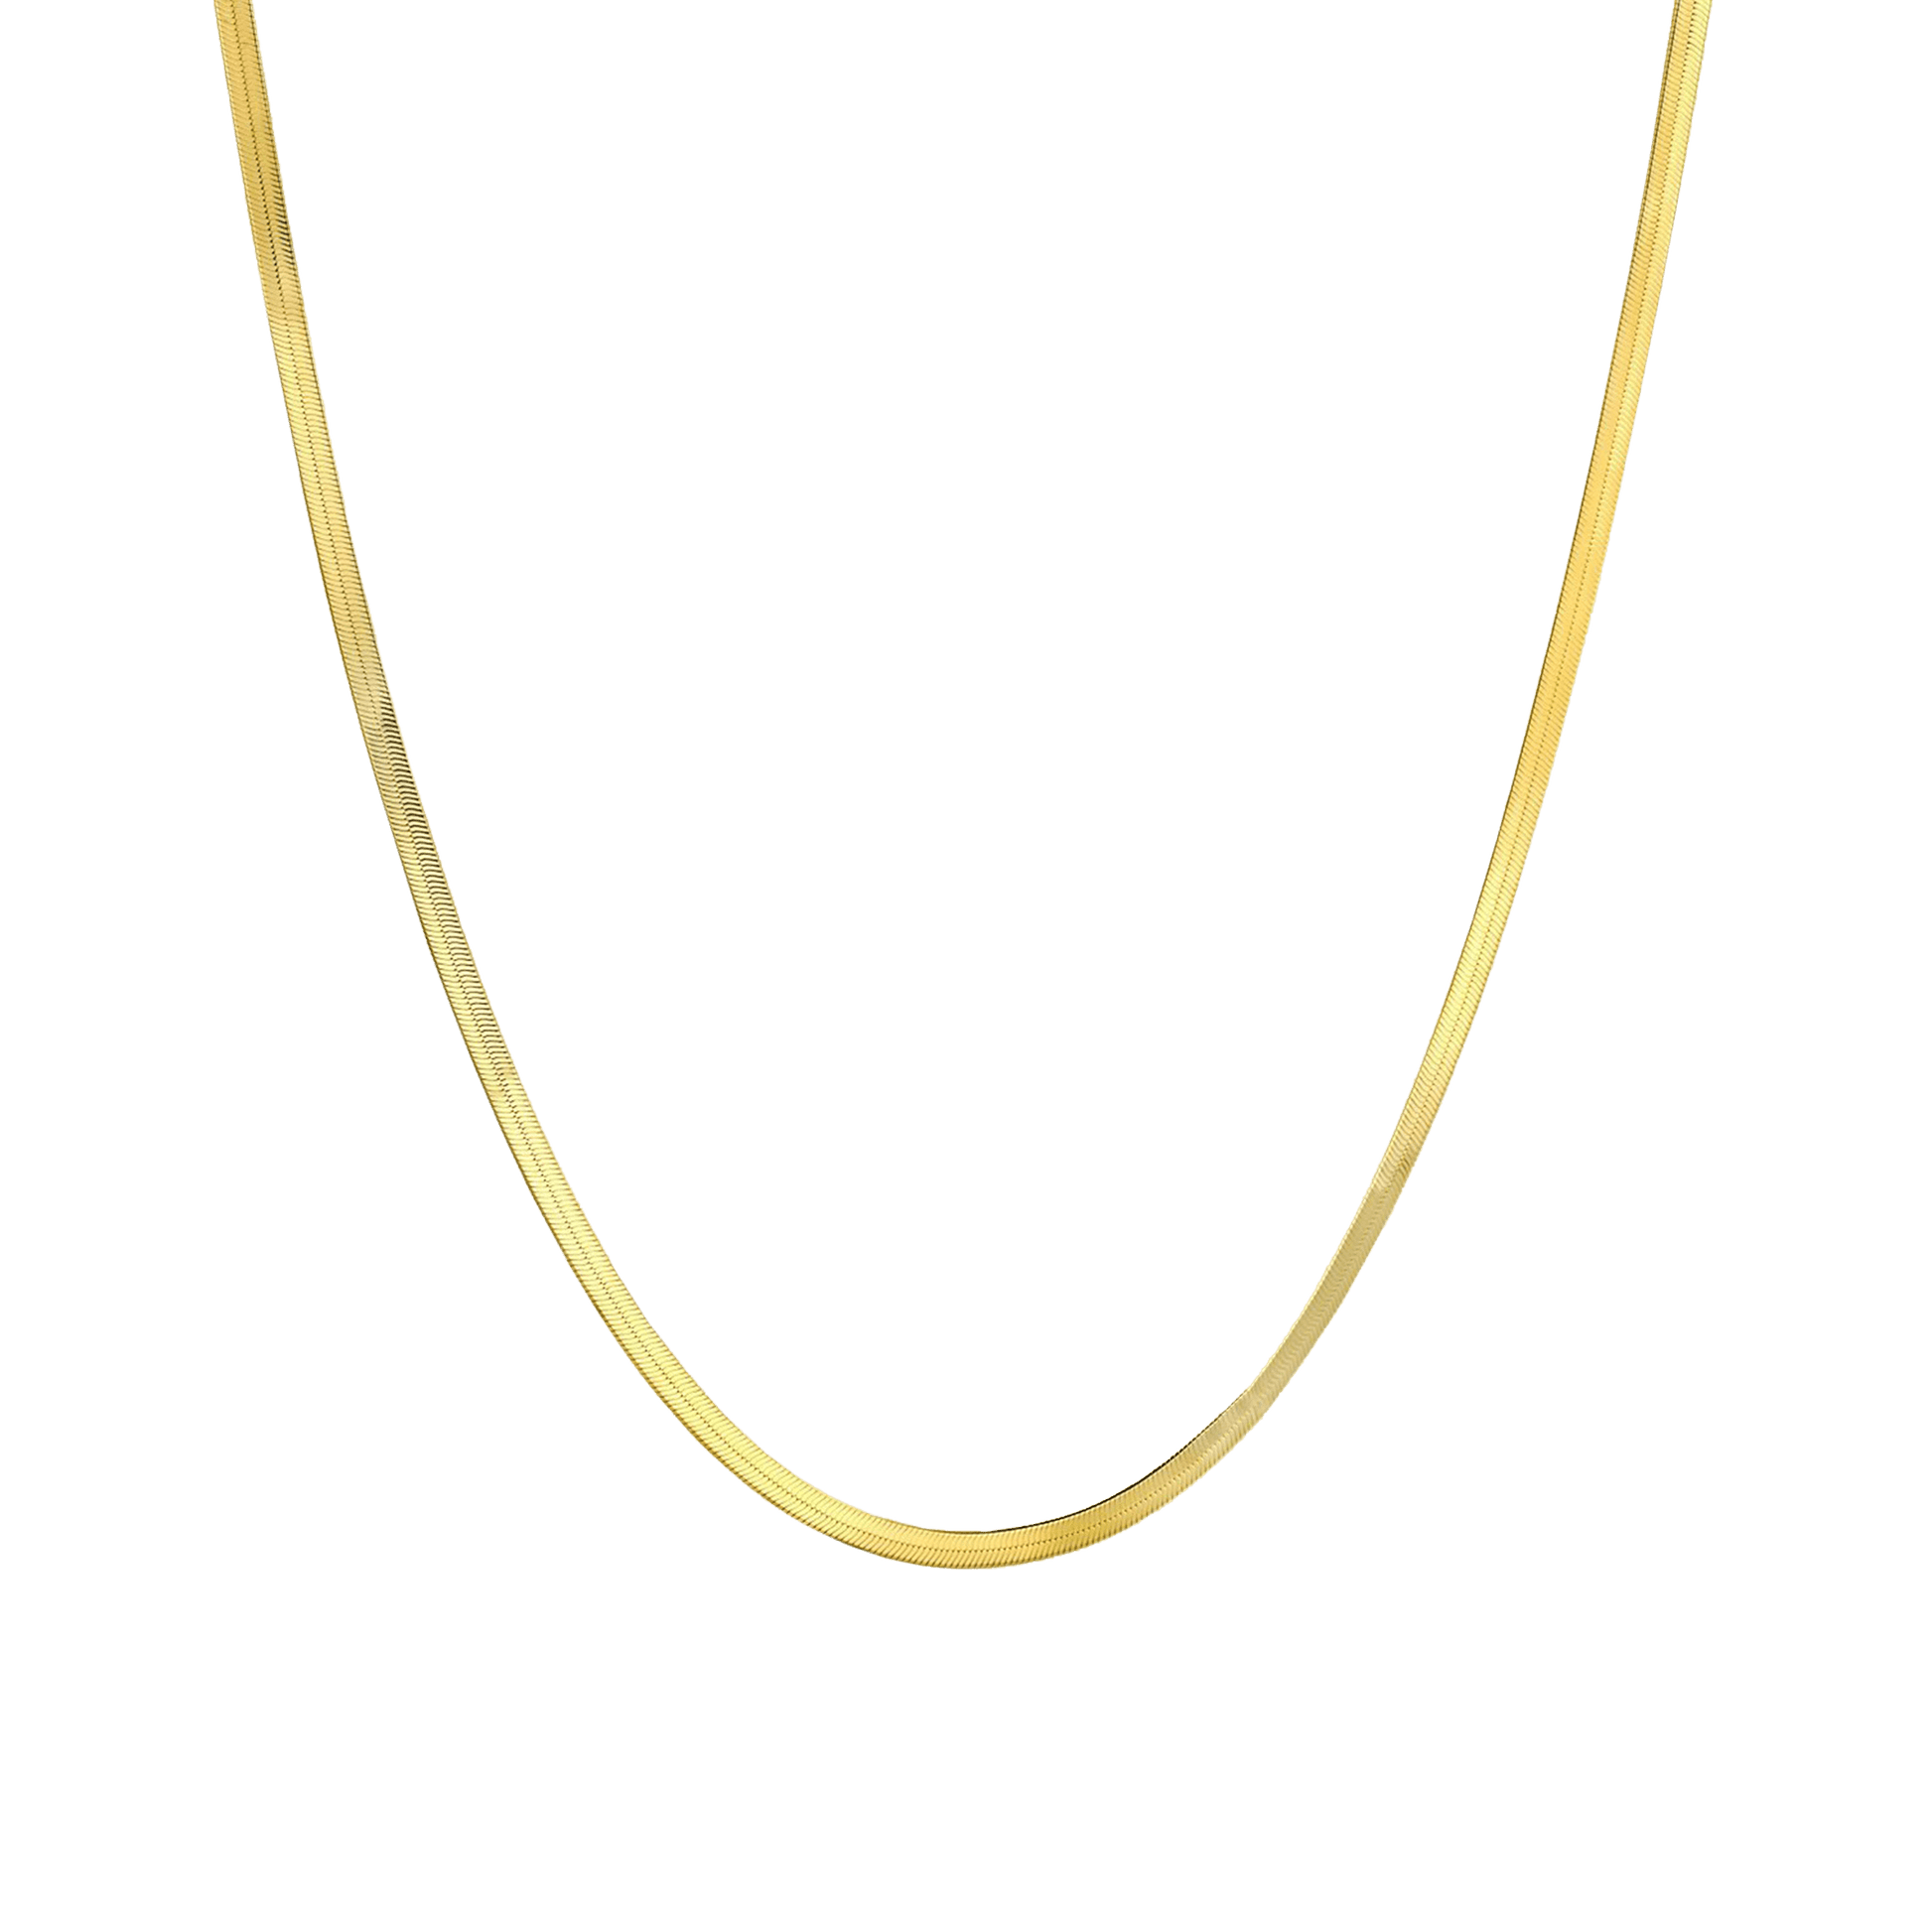 Herringbone Chain Necklace - 925 Sterling Silver Chains magal-dev 